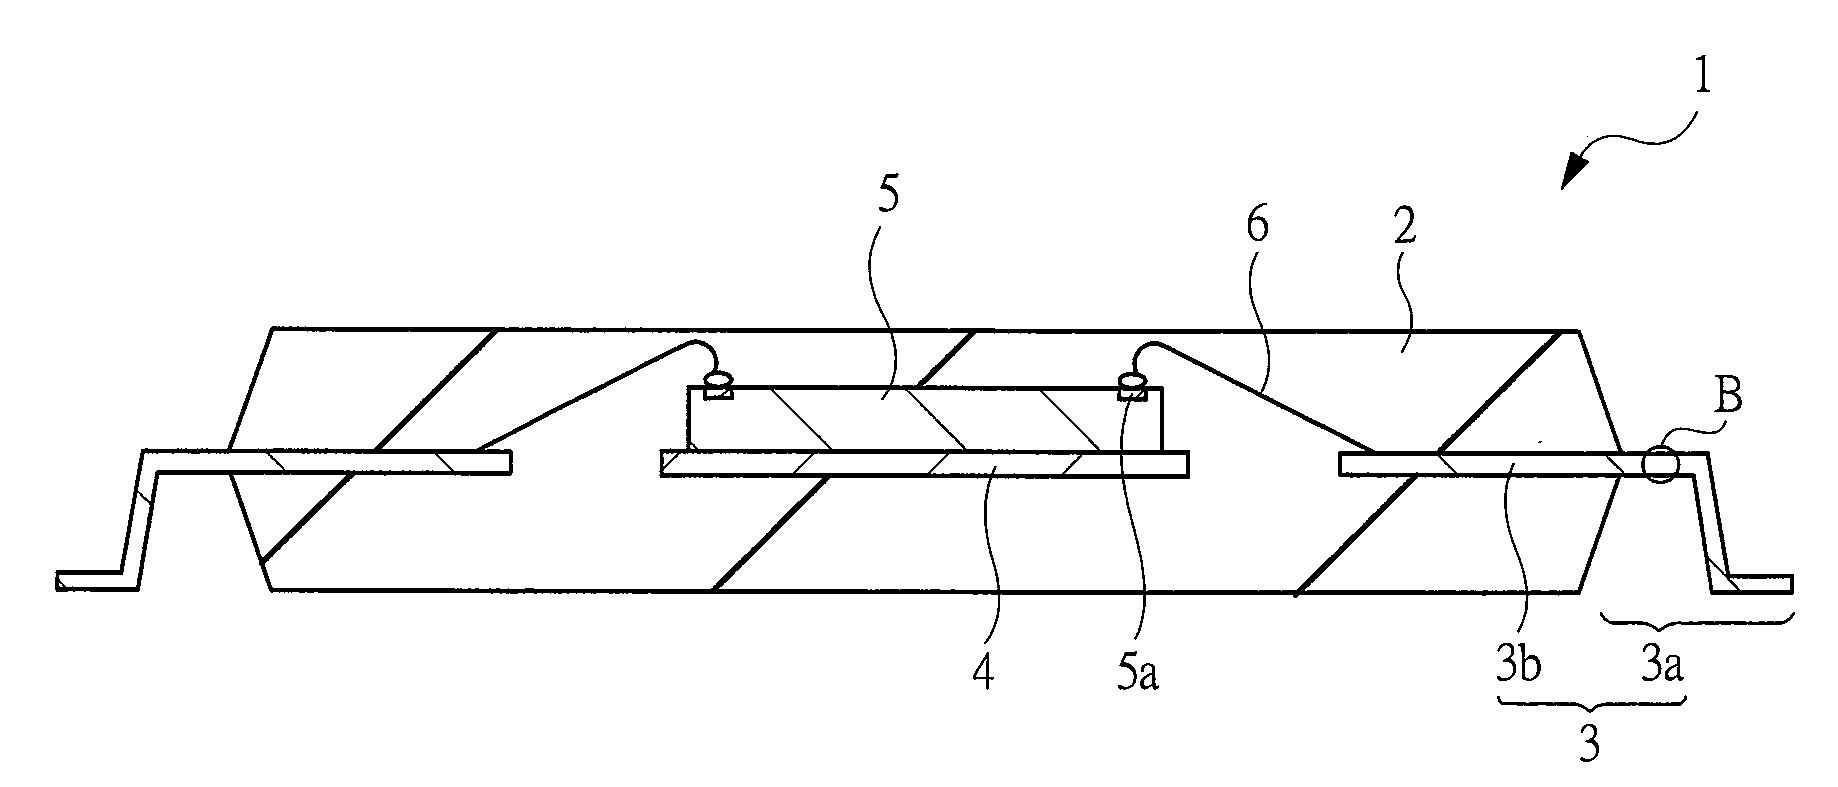 Semiconductor device and its fabrication process